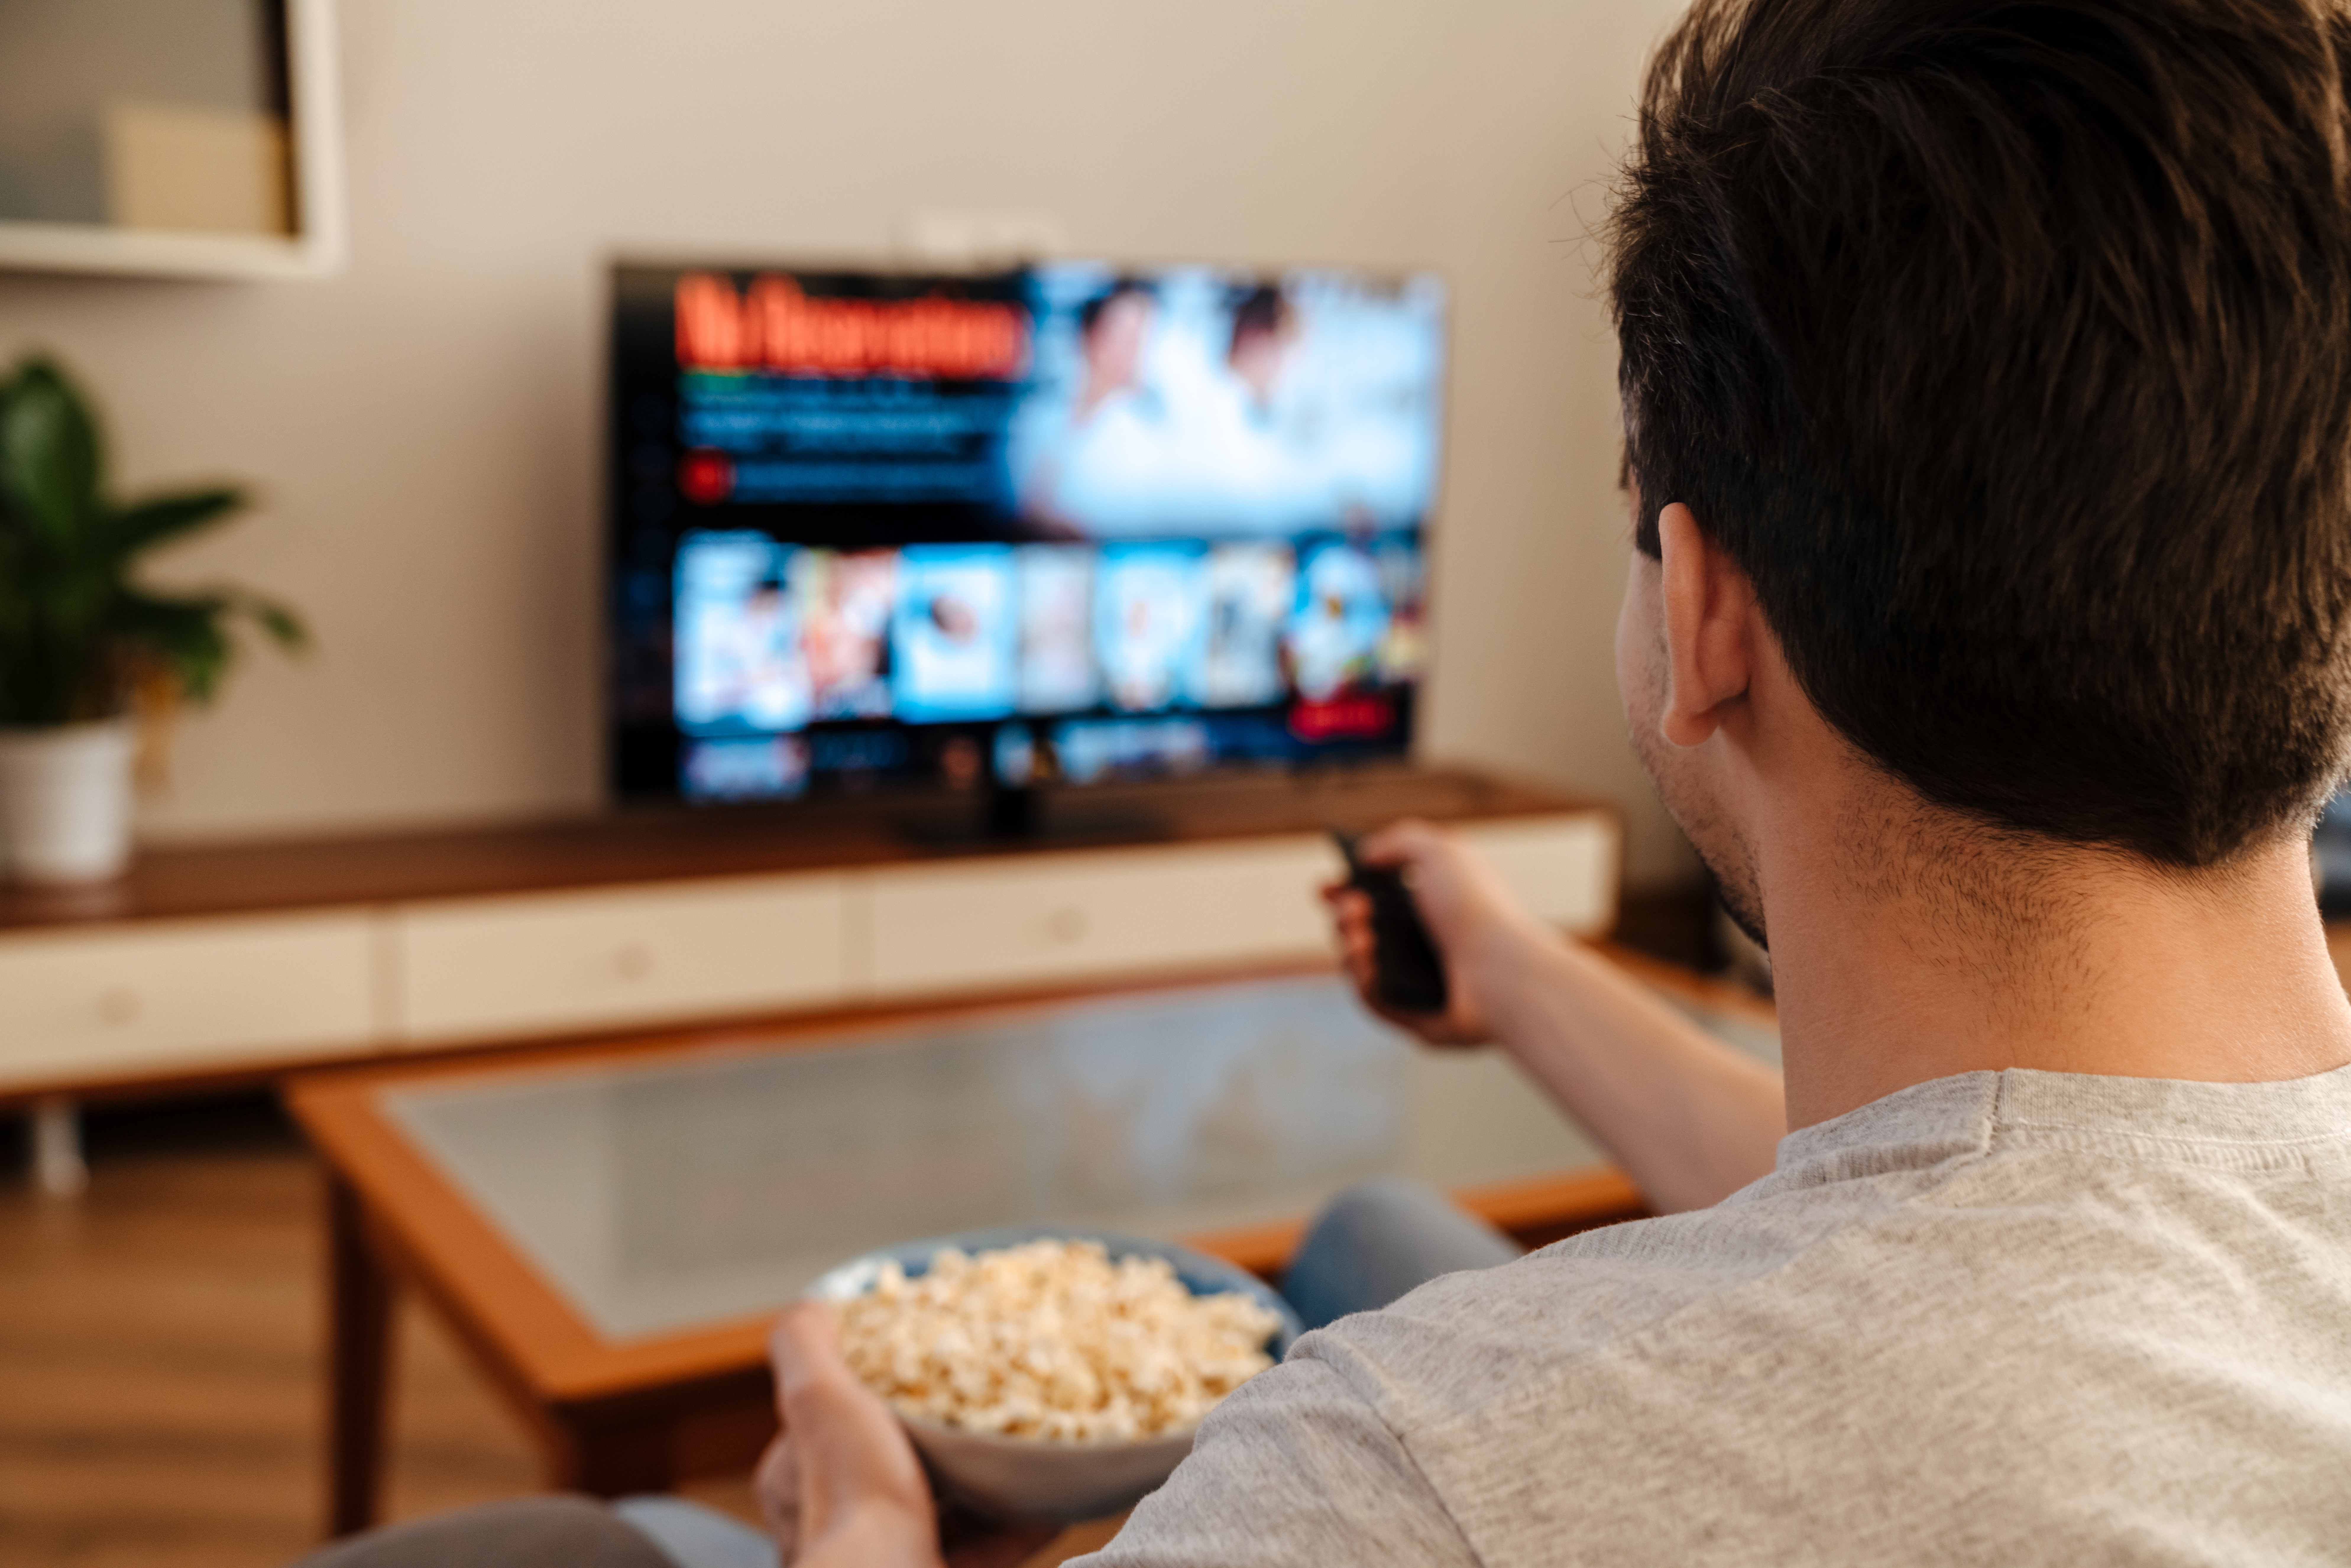 A man watching TV and eating popcorn at home | Source: Shutterstock